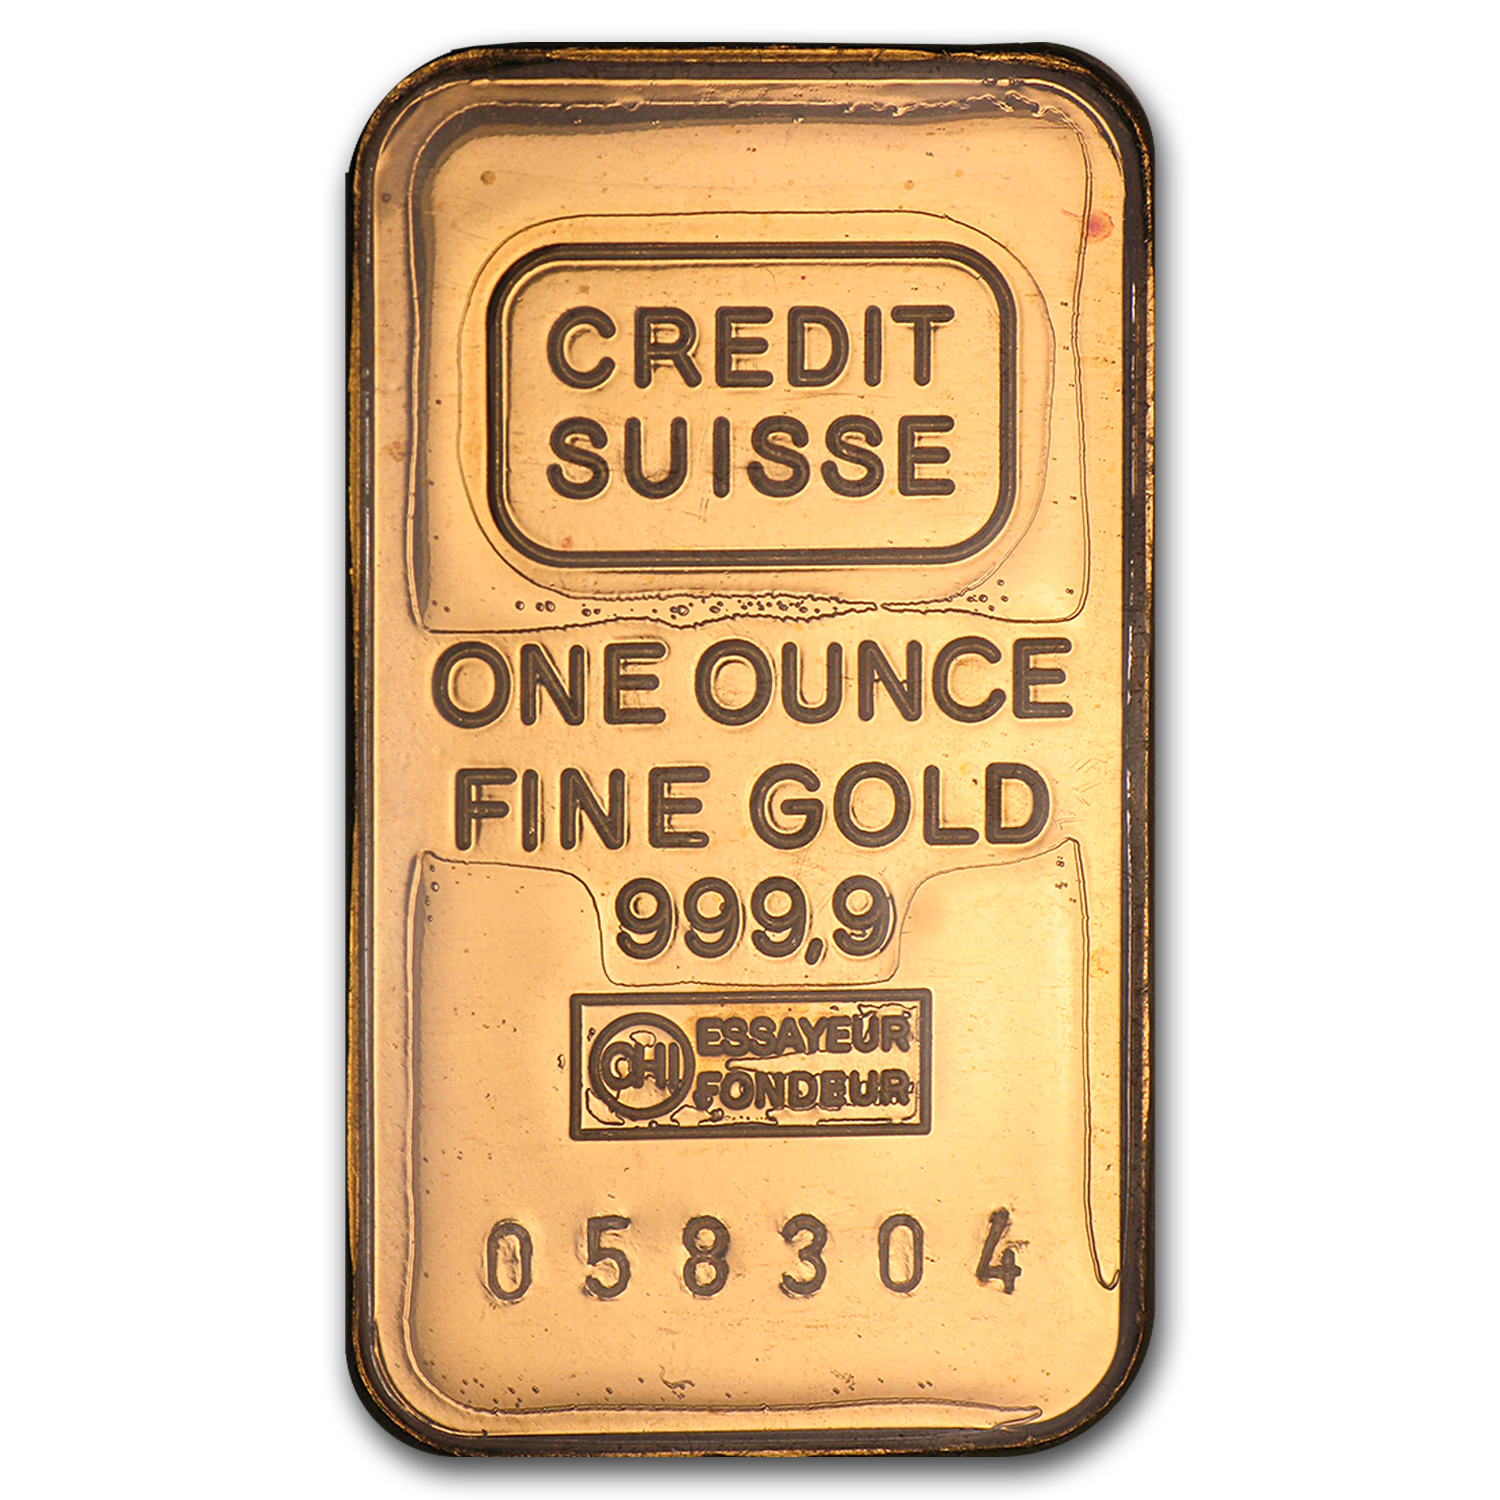 one ounce credit suisse gold bar